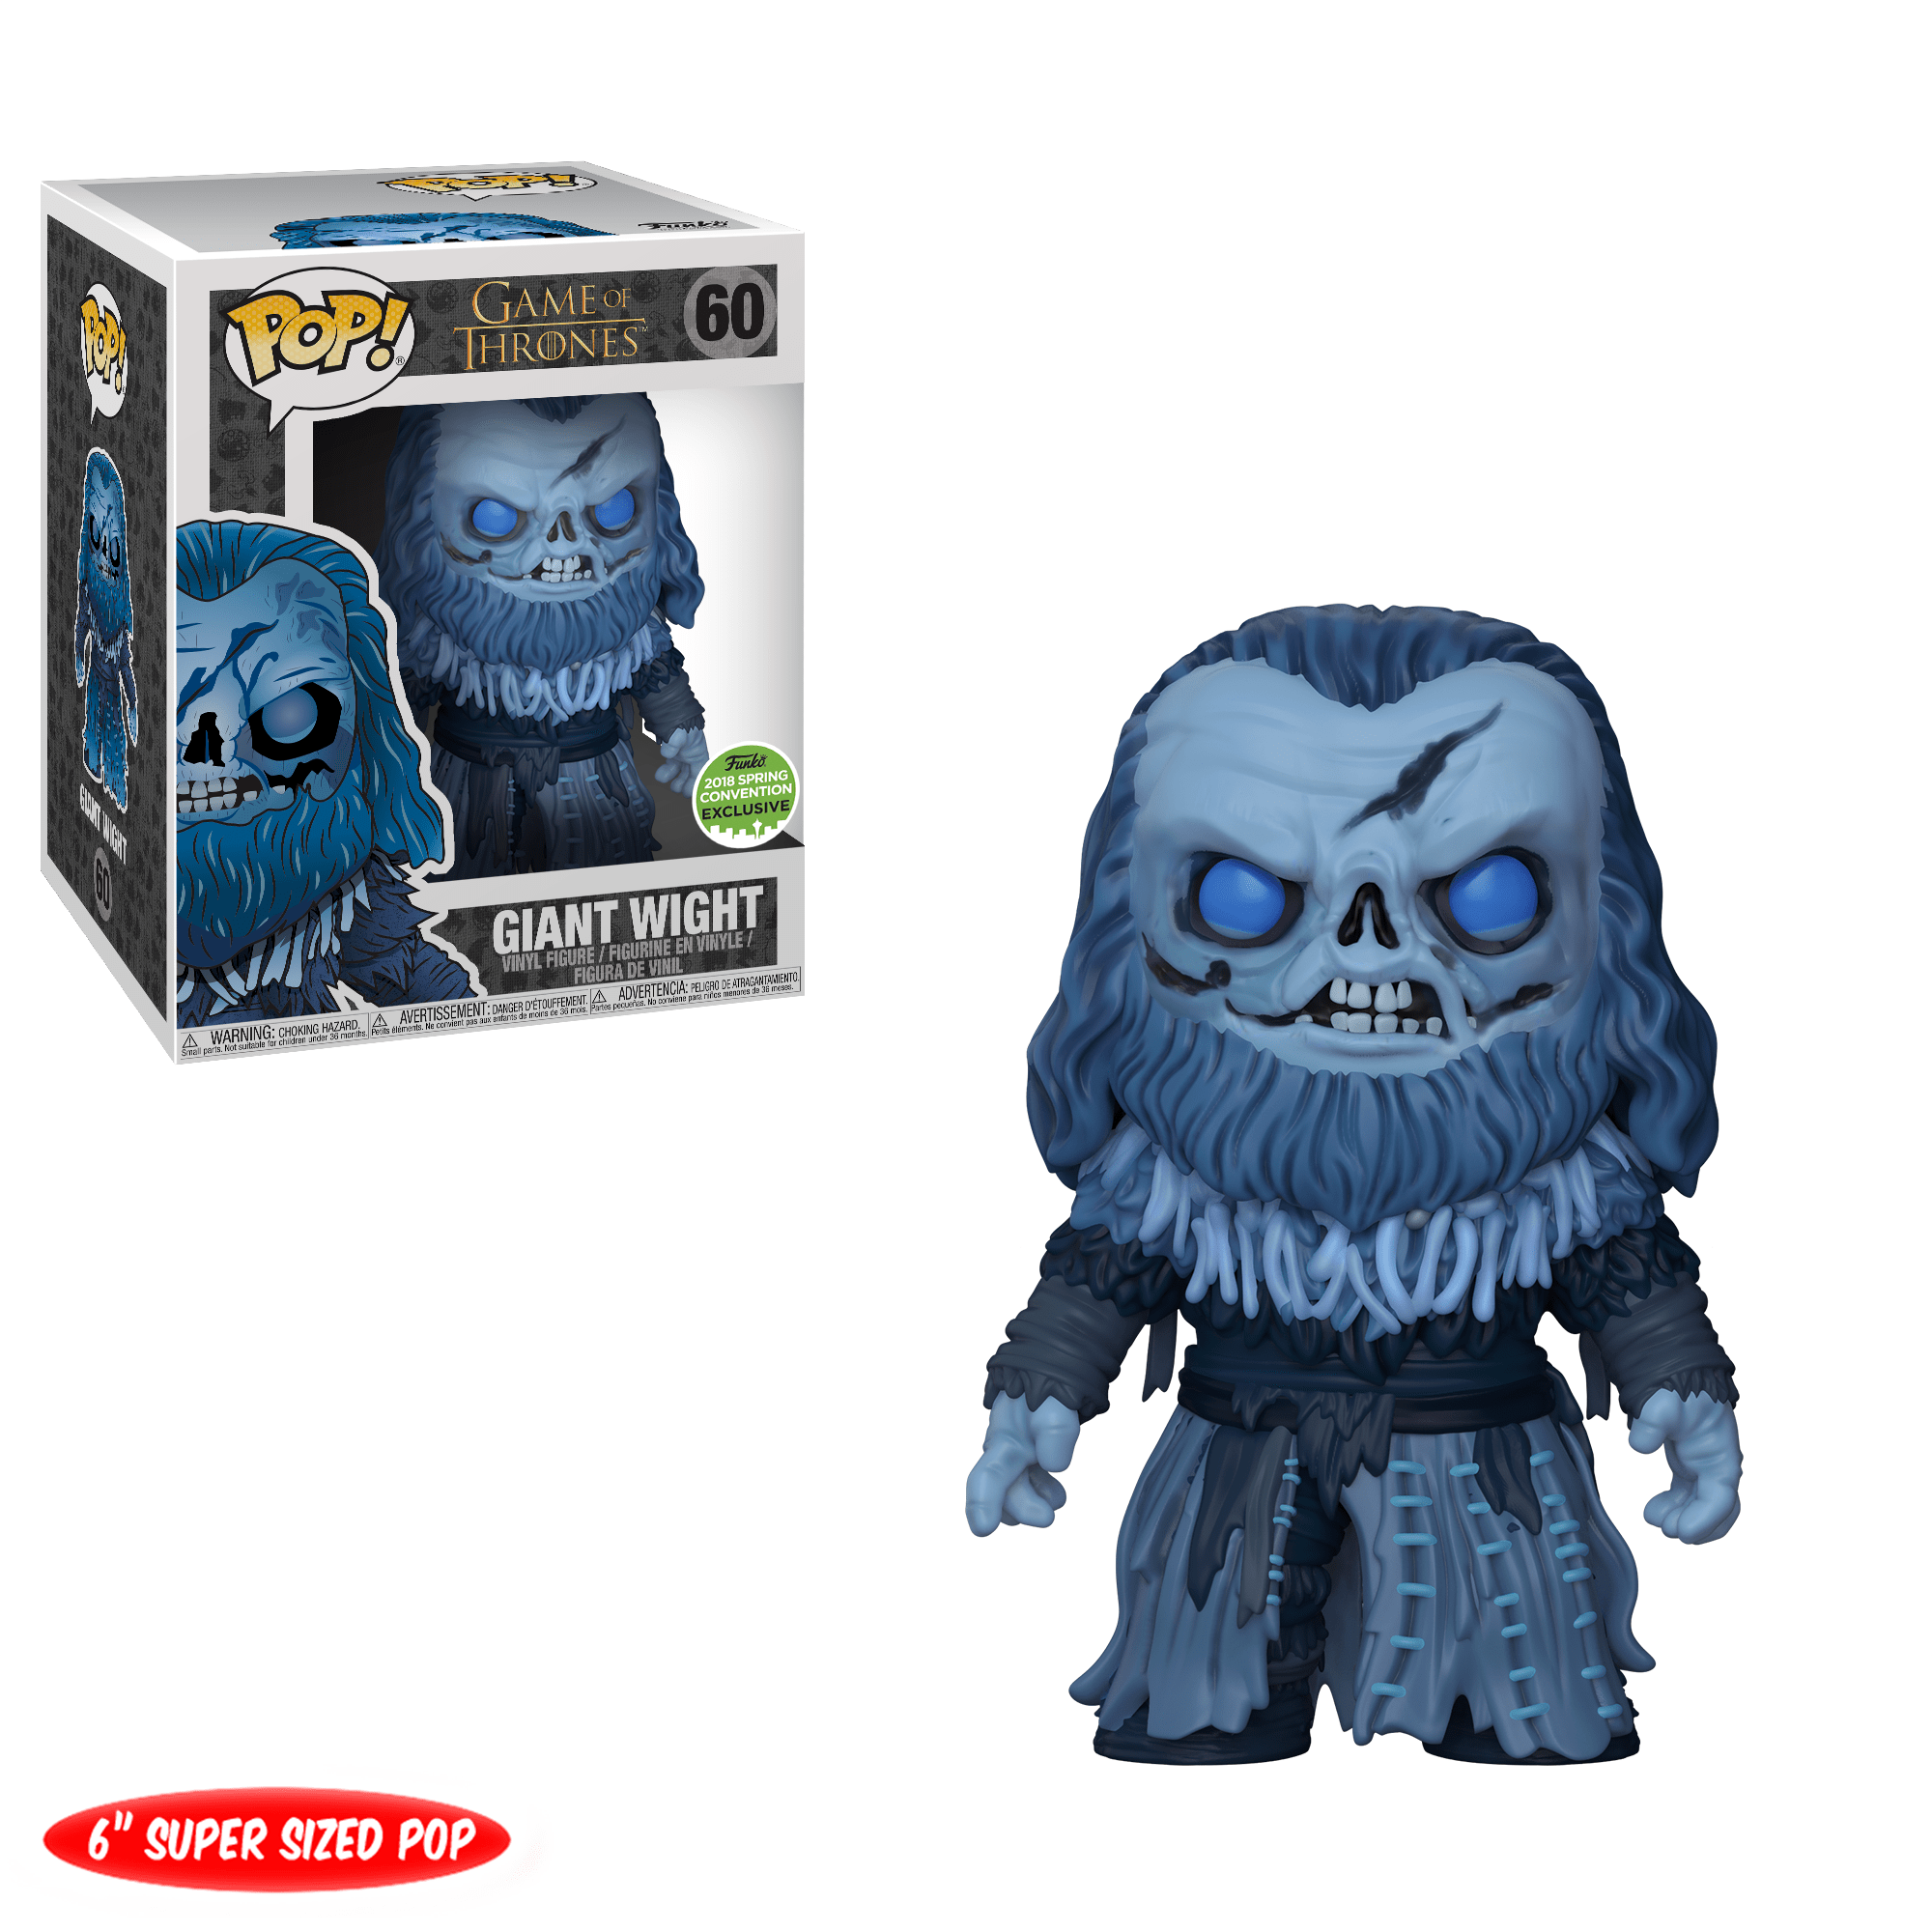 Funko Pop! Giant Wight (6 inch) (Game of Thrones)